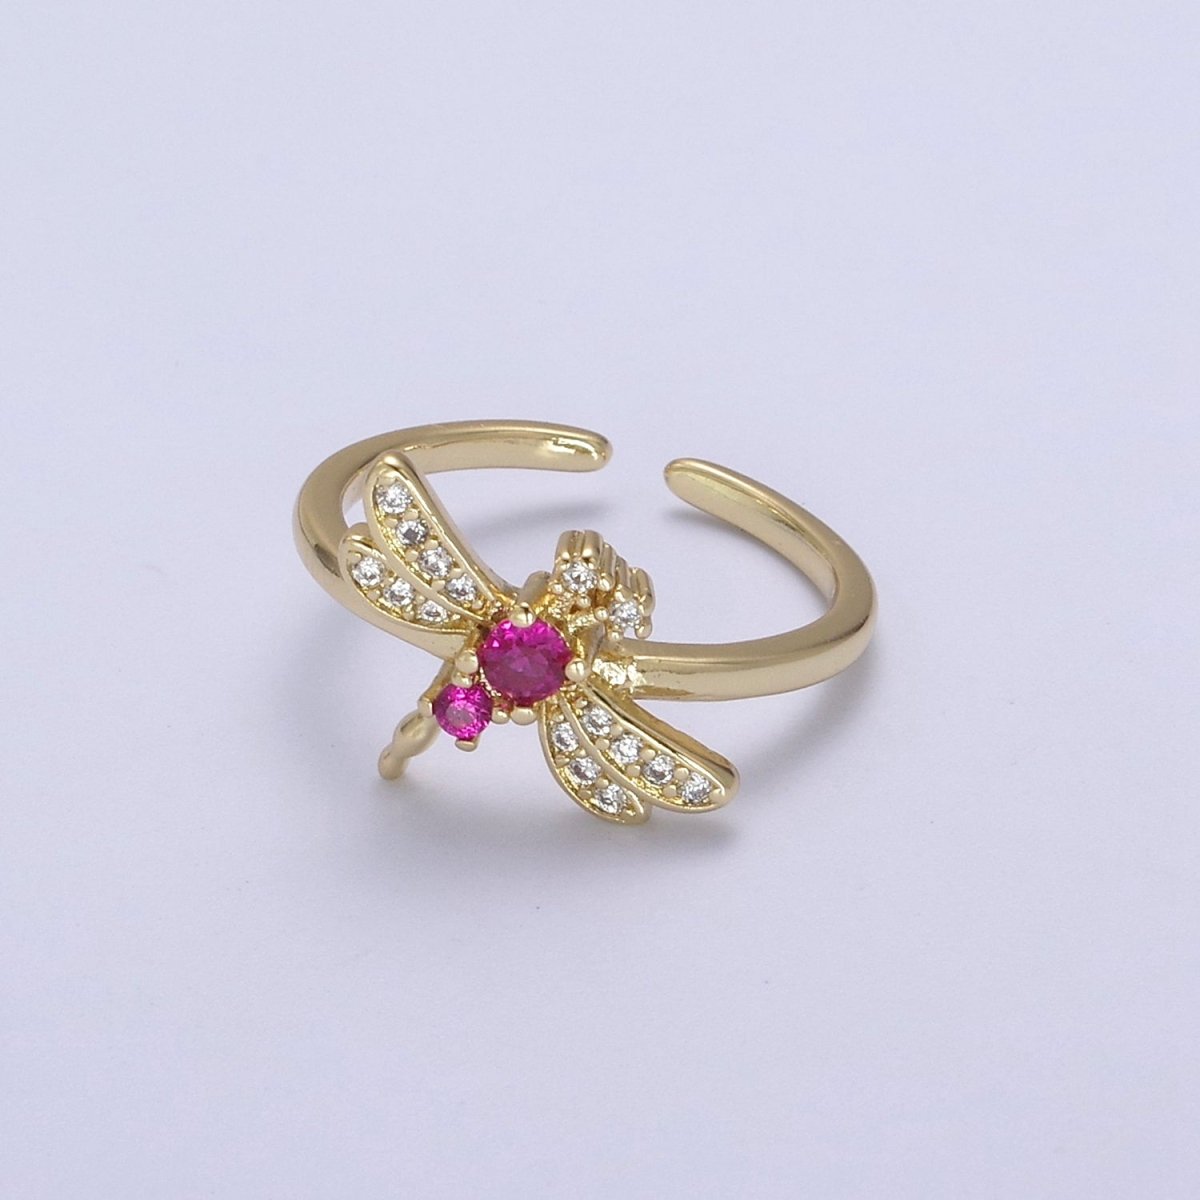 Dainty Pink Fuchsia Micro Pave Dragonfly Adjustable Ring, Minimalist 24K Gold Filled Nature Jewelry U-437 - DLUXCA